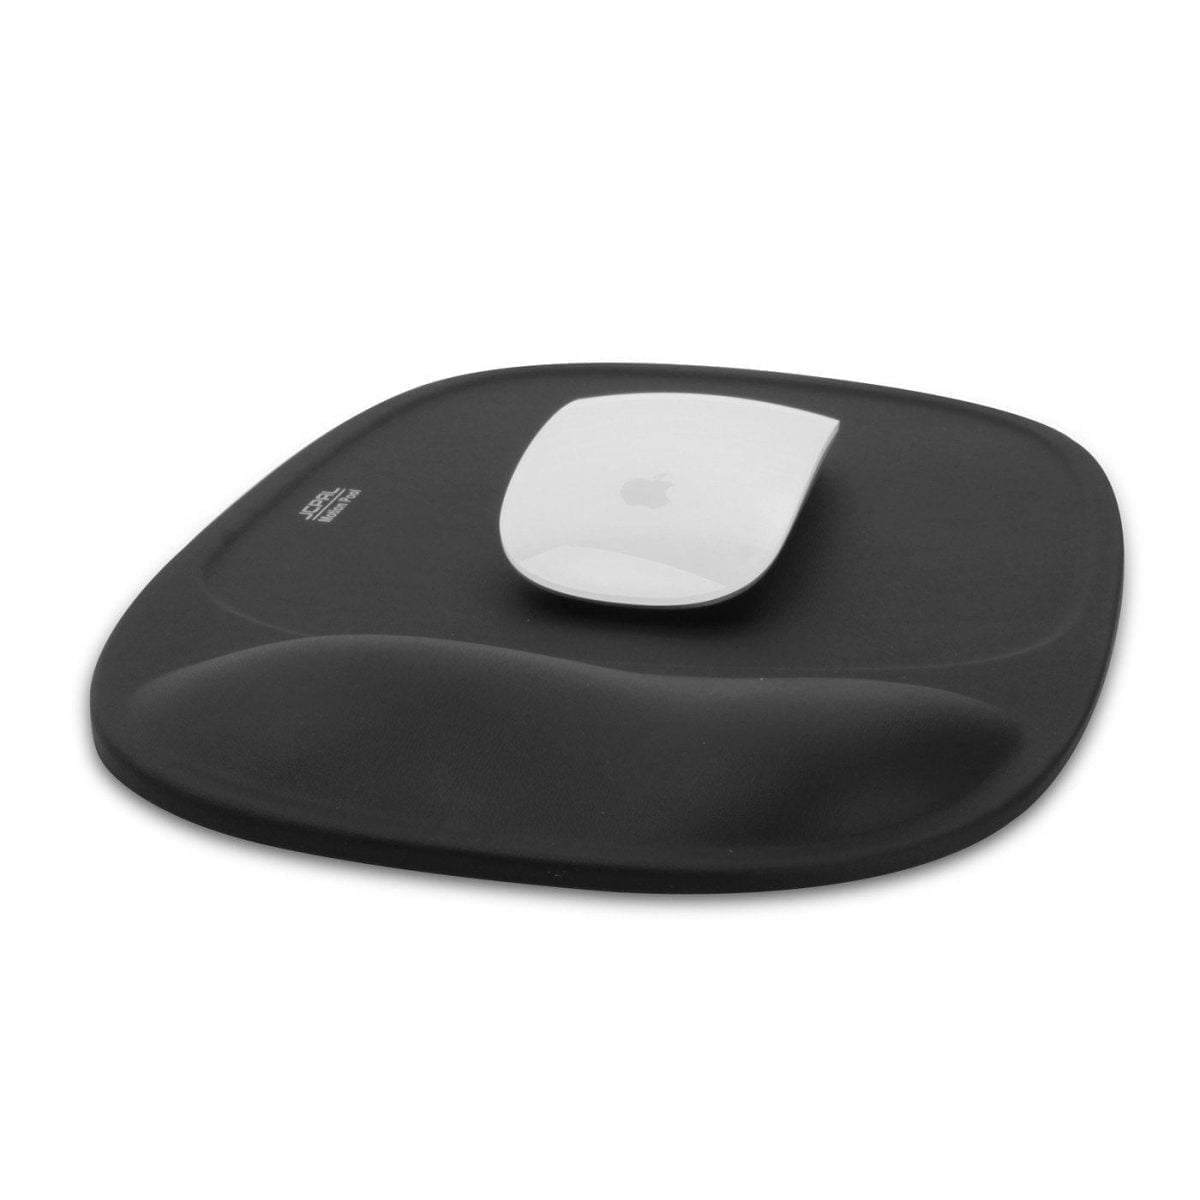 Jcpal Accessories Comforpad Ergonomic Mouse Pad &Amp;Lt;H1 Class=&Amp;Quot;Product_Name Title&Amp;Quot;&Amp;Gt;Comforpad Ergonomic Mouse Pad&Amp;Lt;/H1&Amp;Gt; With An Integrated Foam Wrist Rest, The Comfortpad Mouse Pad Offers Comfortable Support For Your Wrist To Prevent Fatigue And Strain During Extended Computer Sessions. The Large Mousing Area Has A Smooth Surface For Quick And Comfortable Movement And Is Finely Textured For Accurate Optical And Laser Mouse Tracking. The Comforpad Also Features A Non-Slip Backing Which Effectively Prevents Shifting And Slipping During Use. &Amp;Lt;Strong&Amp;Gt;Dimensions Width:&Amp;Lt;/Strong&Amp;Gt; 180Mm &Amp;Lt;Strong&Amp;Gt;Length:&Amp;Lt;/Strong&Amp;Gt; 260Mm &Amp;Lt;Strong&Amp;Gt;Thickness:&Amp;Lt;/Strong&Amp;Gt; Wrist Pad: 20Mm, Mouse Area: 7Mm Comforpad Ergonomic Mouse Pad Jcpal - Jcp6057 Comforpad Ergonomic Mouse Pad Jcpal - Jcp6057